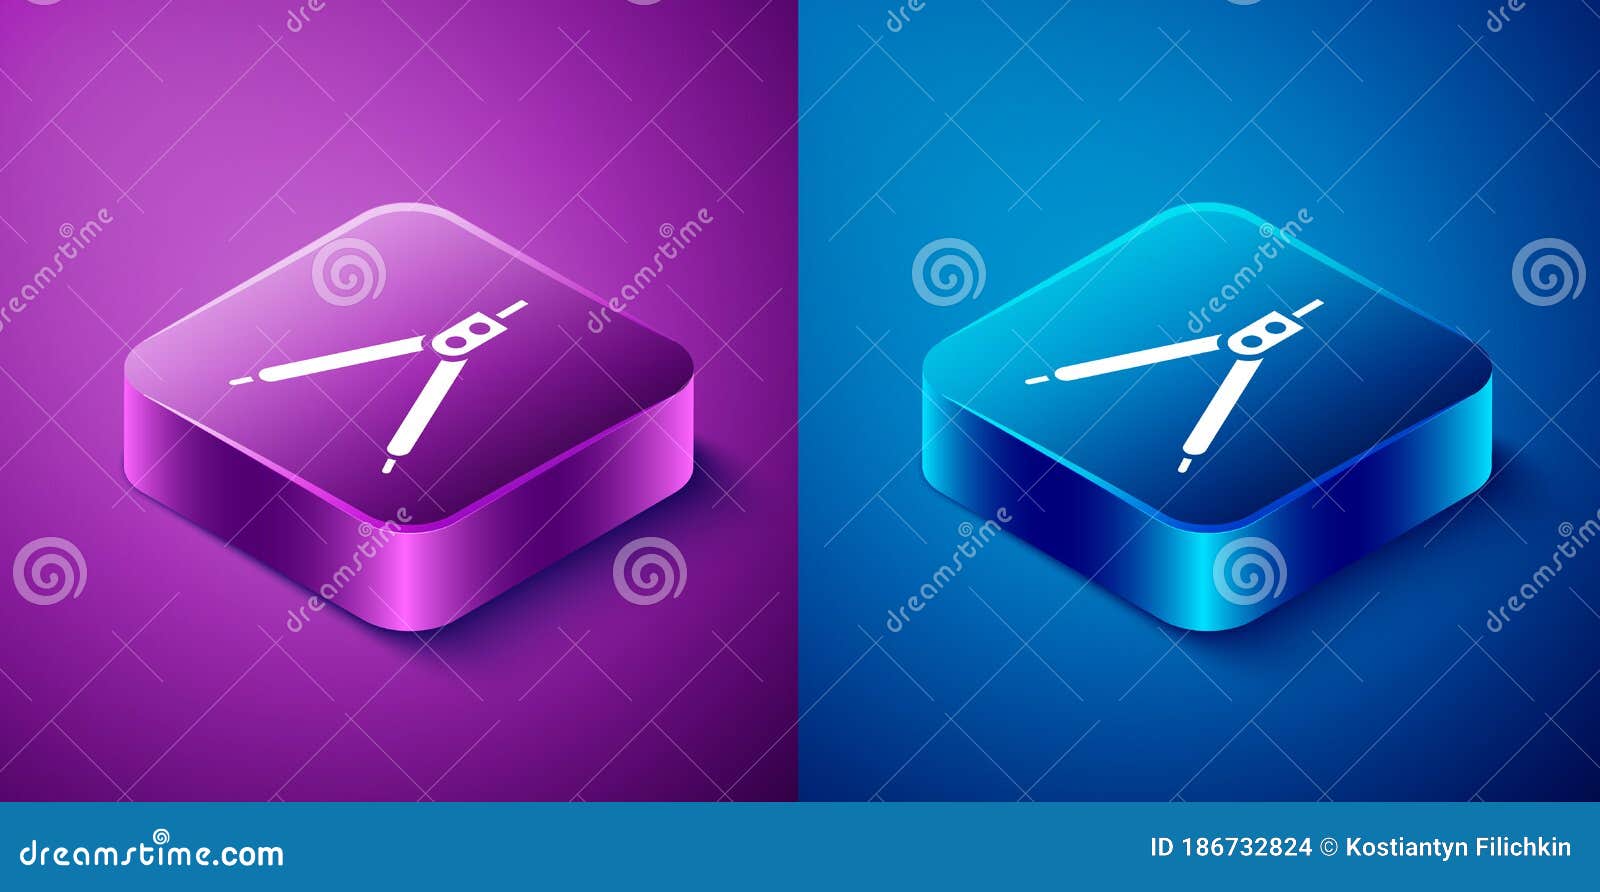 Isometric Drawing Compass Icon Isolated on Blue and Purple Background ...